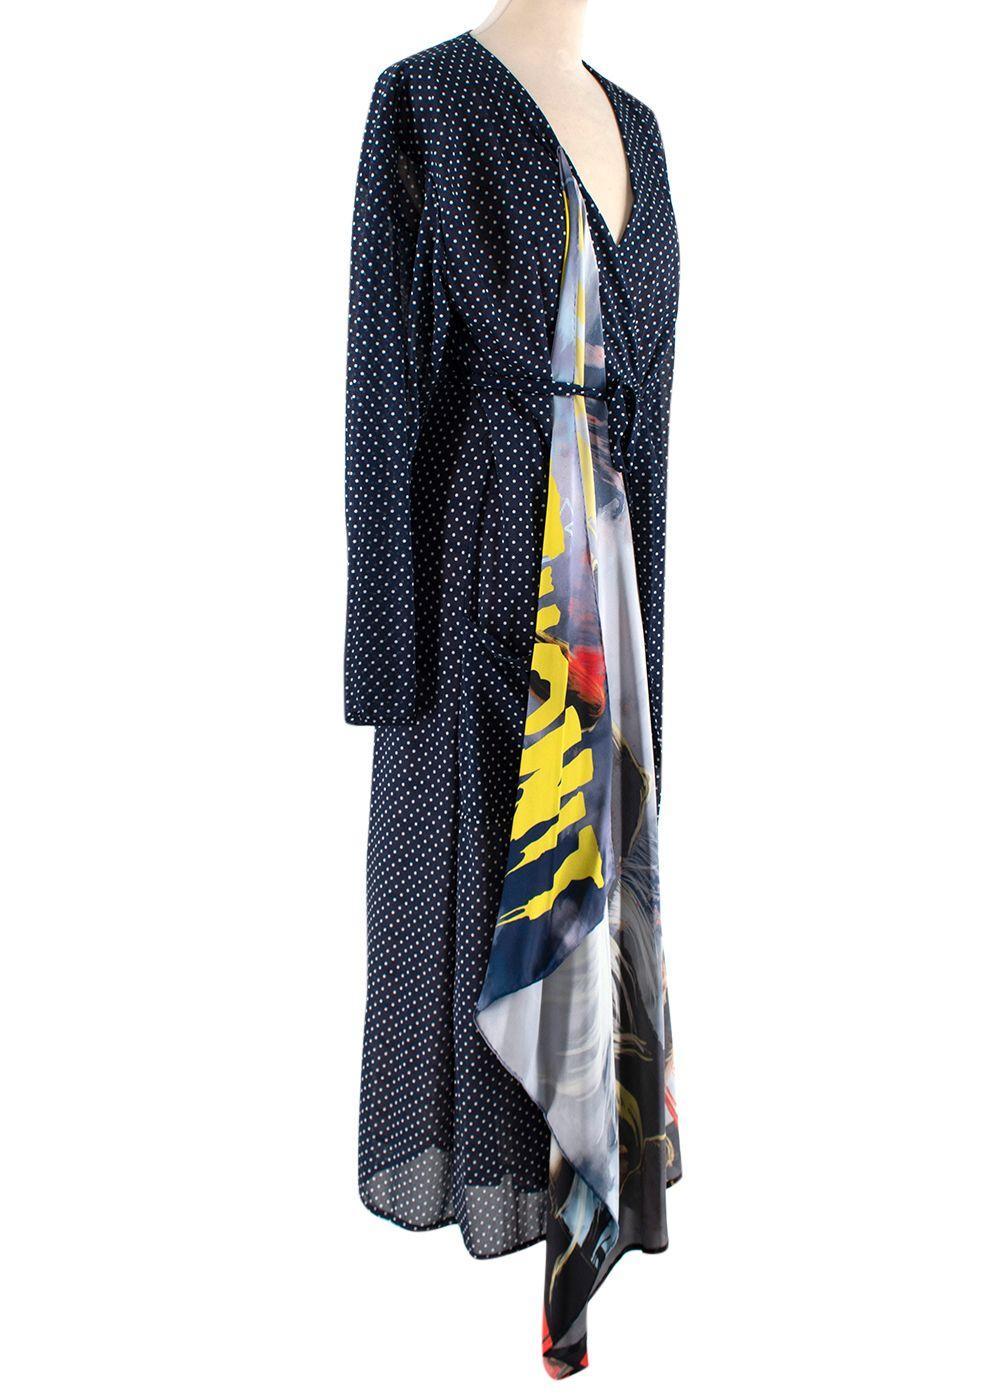 Vetements Navy Polka Dot Multi Fabric Wrap Dress

- Fluid wrap dress in navy and white polka-dot pattern
- Contrasting abstract-printed scarf-like drape
- Asymmetric silhouette
- Beige lining with black logo pattern
- Cut to a midi